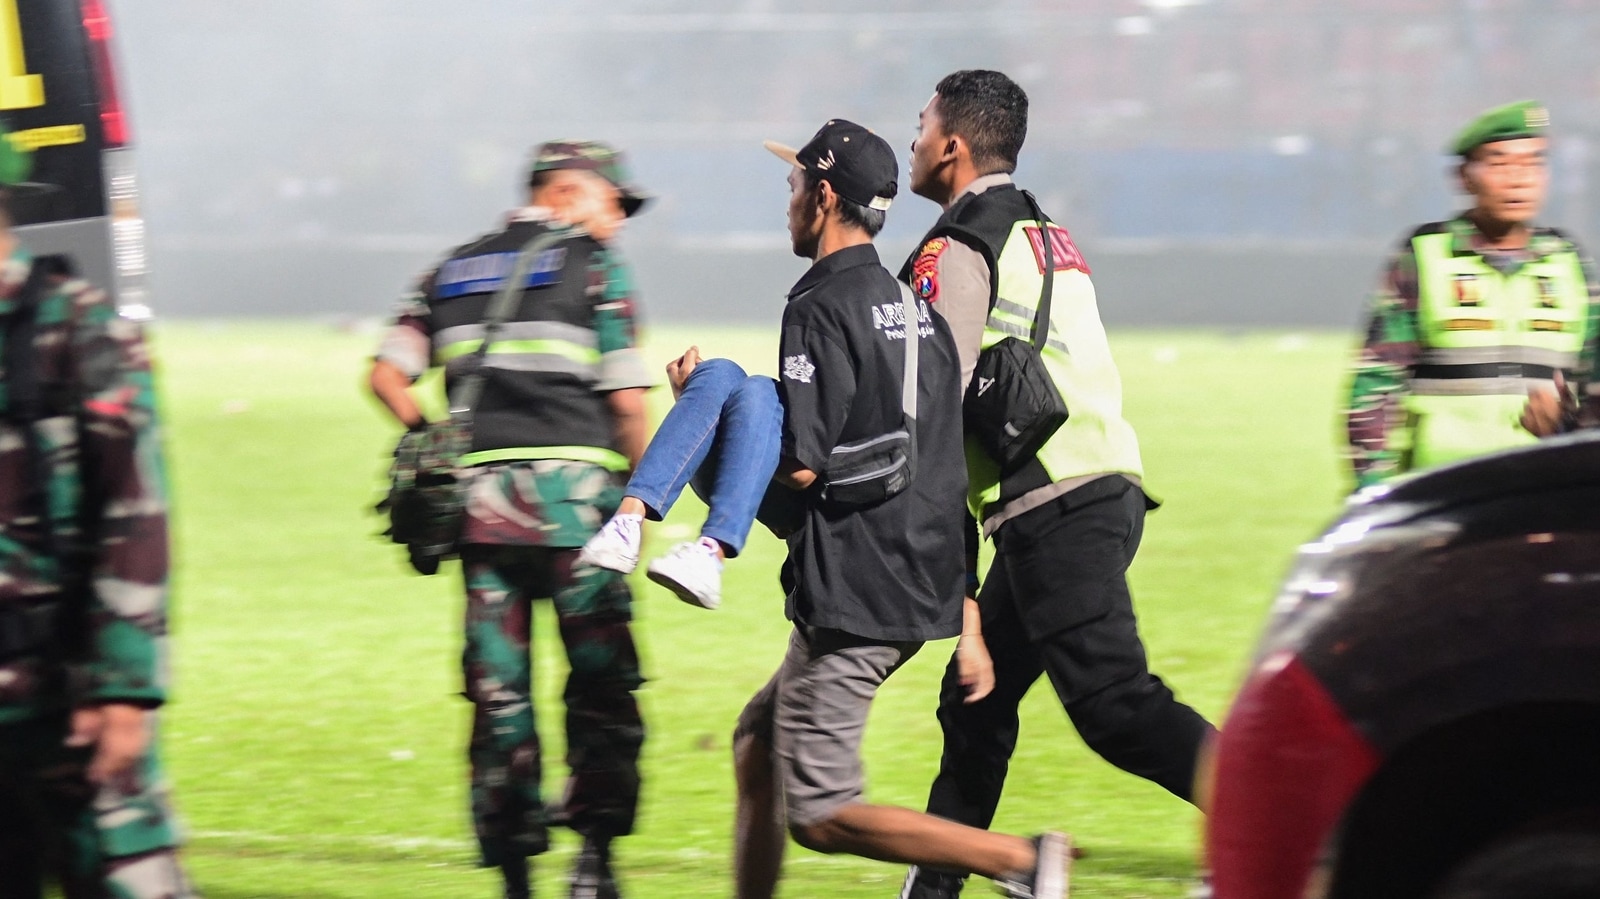 malang-stadium-exit-gates-too-small-for-escape-indonesia-police